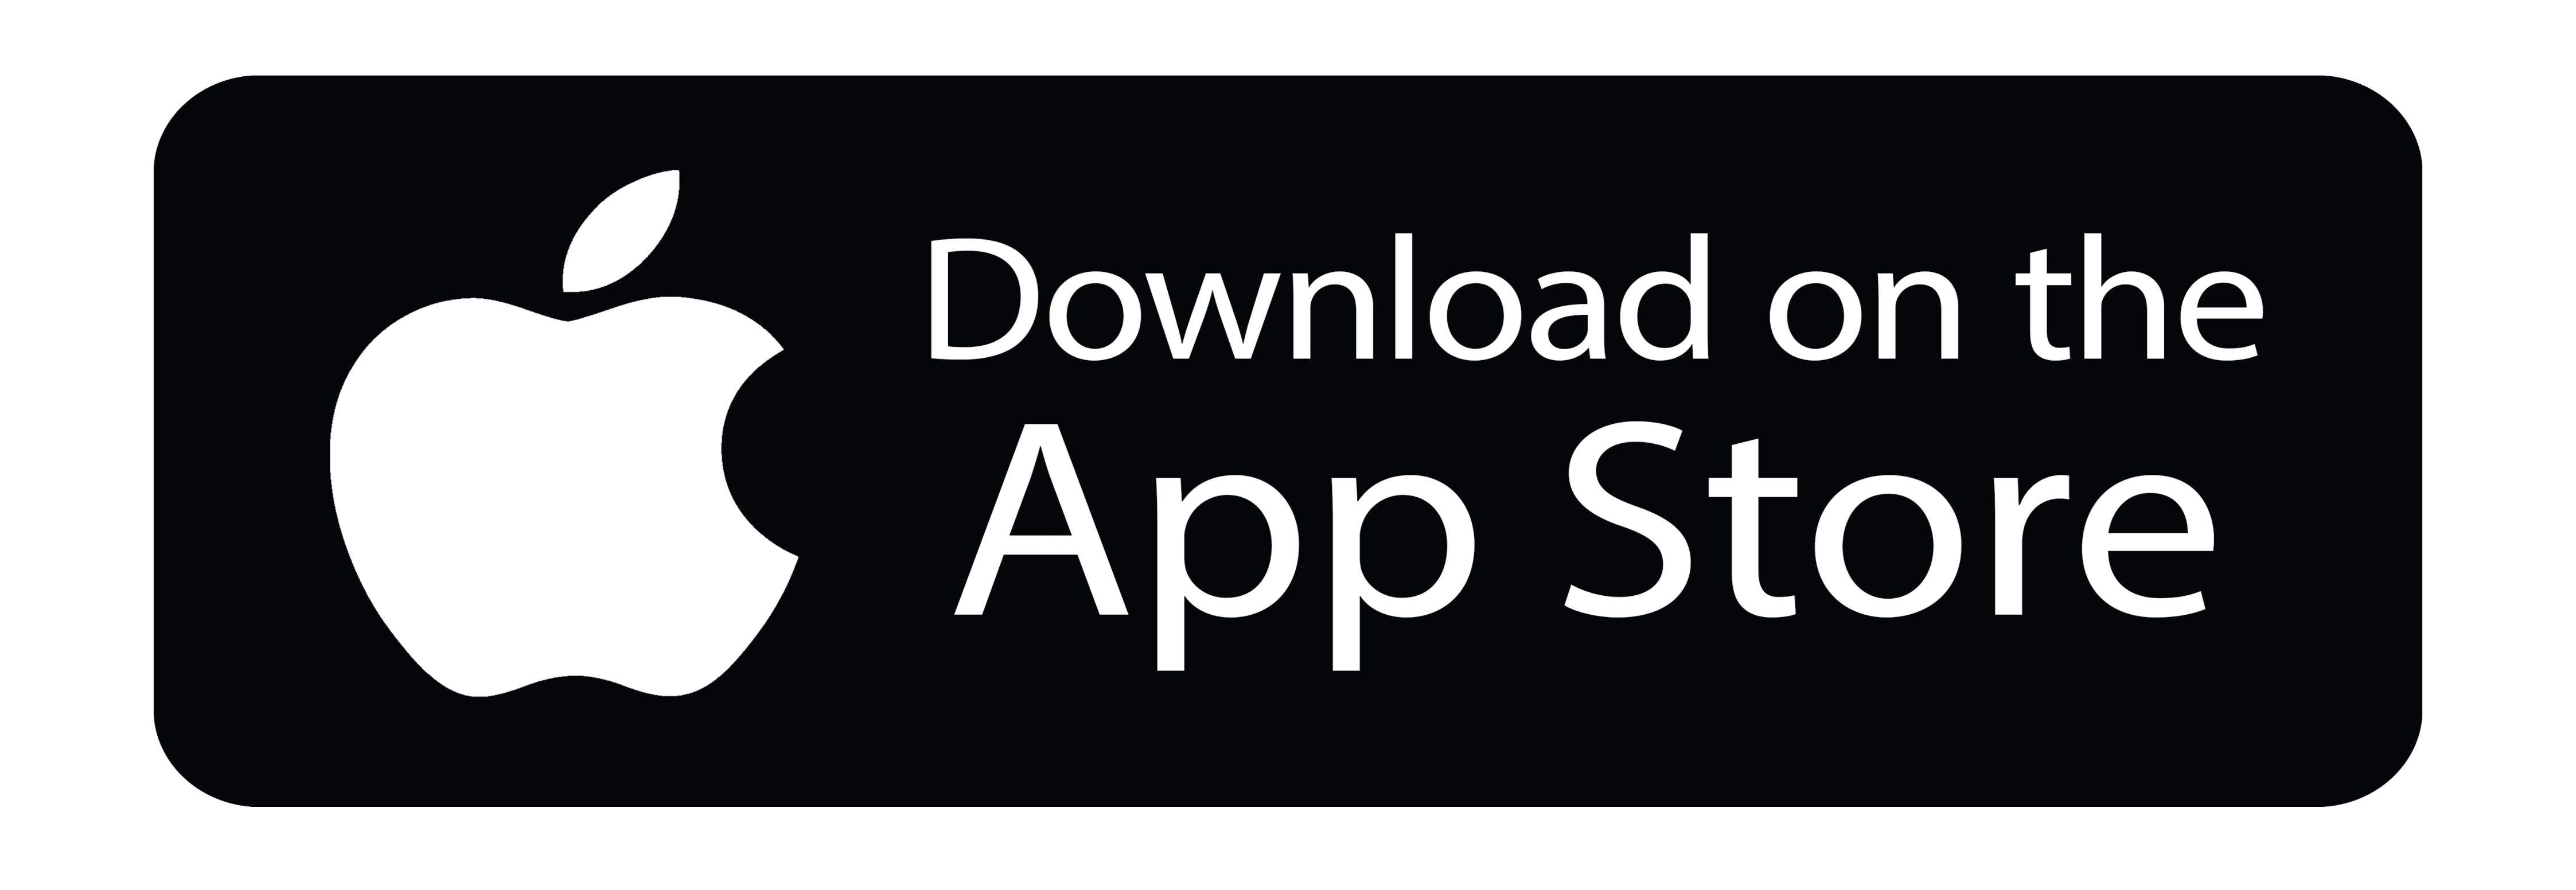 App Store download button